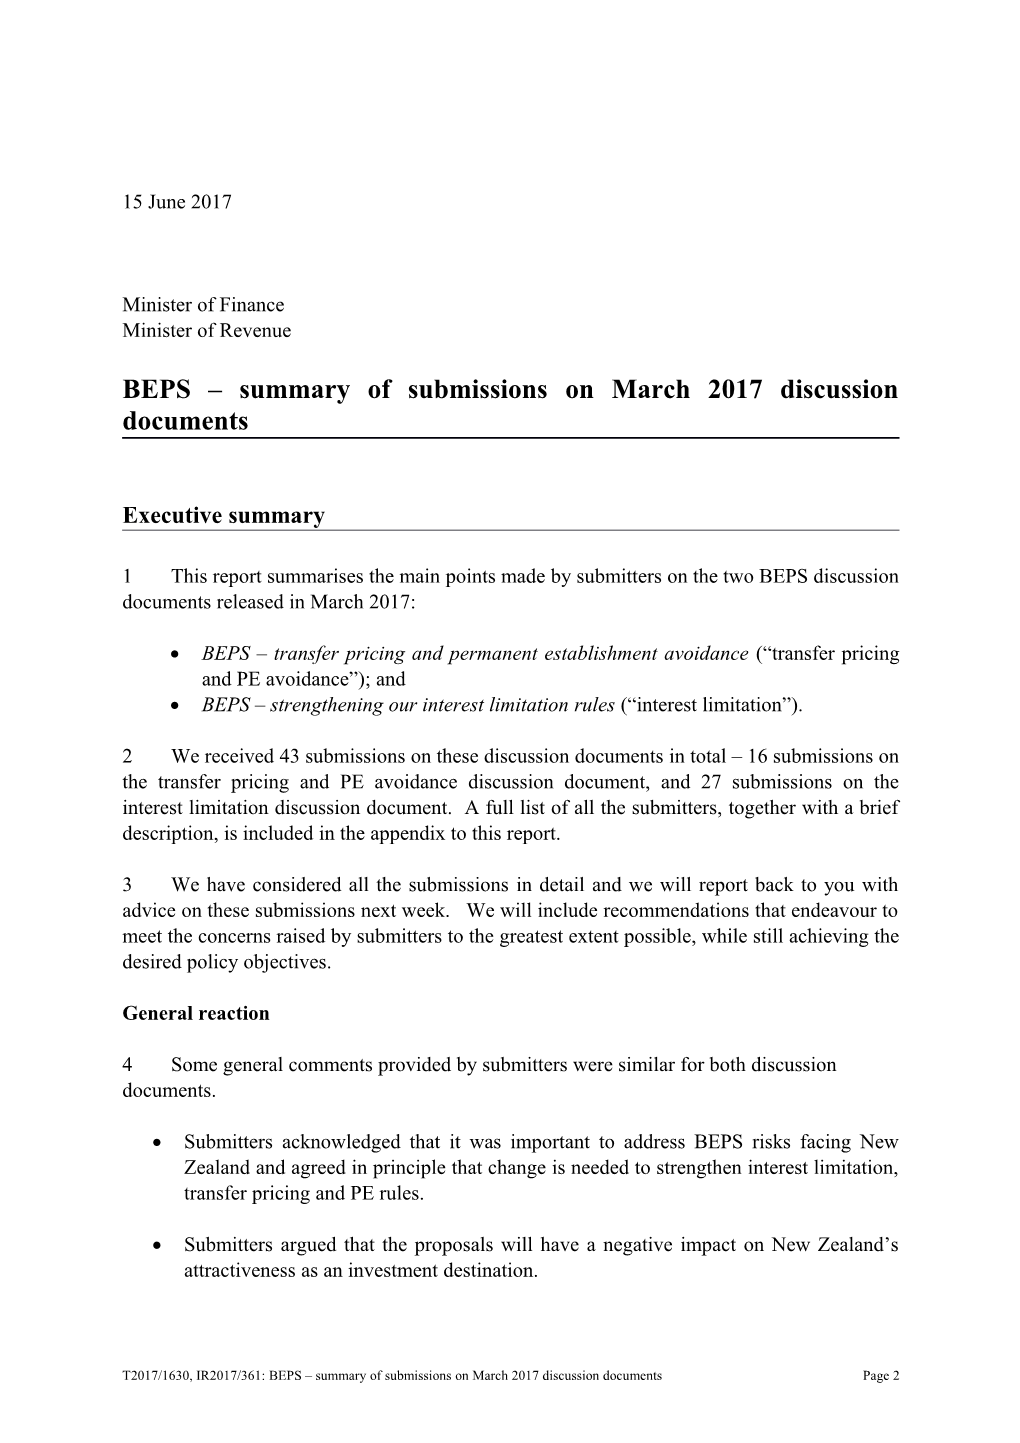 Tax Policy Report: BEPS Summary of Submissions on March 2017 Discussion Documents